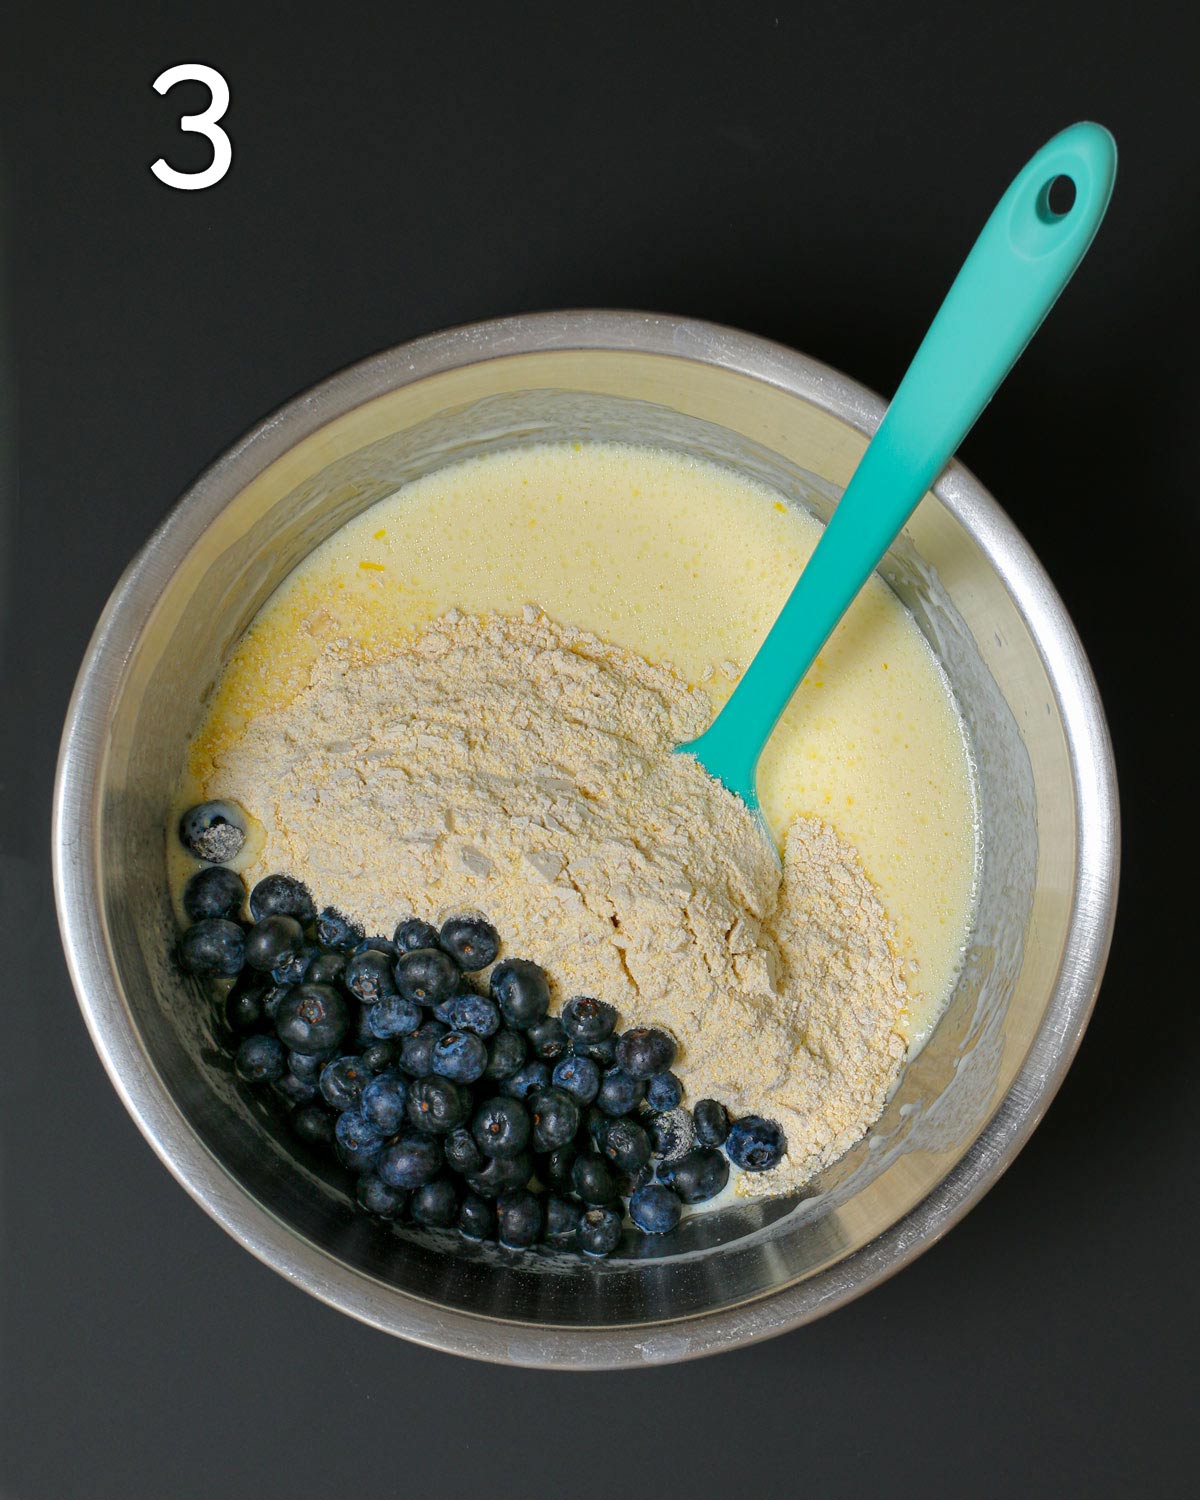 dry added to wet in bowl with blueberries atop; a teal spatula is submerged in it all.